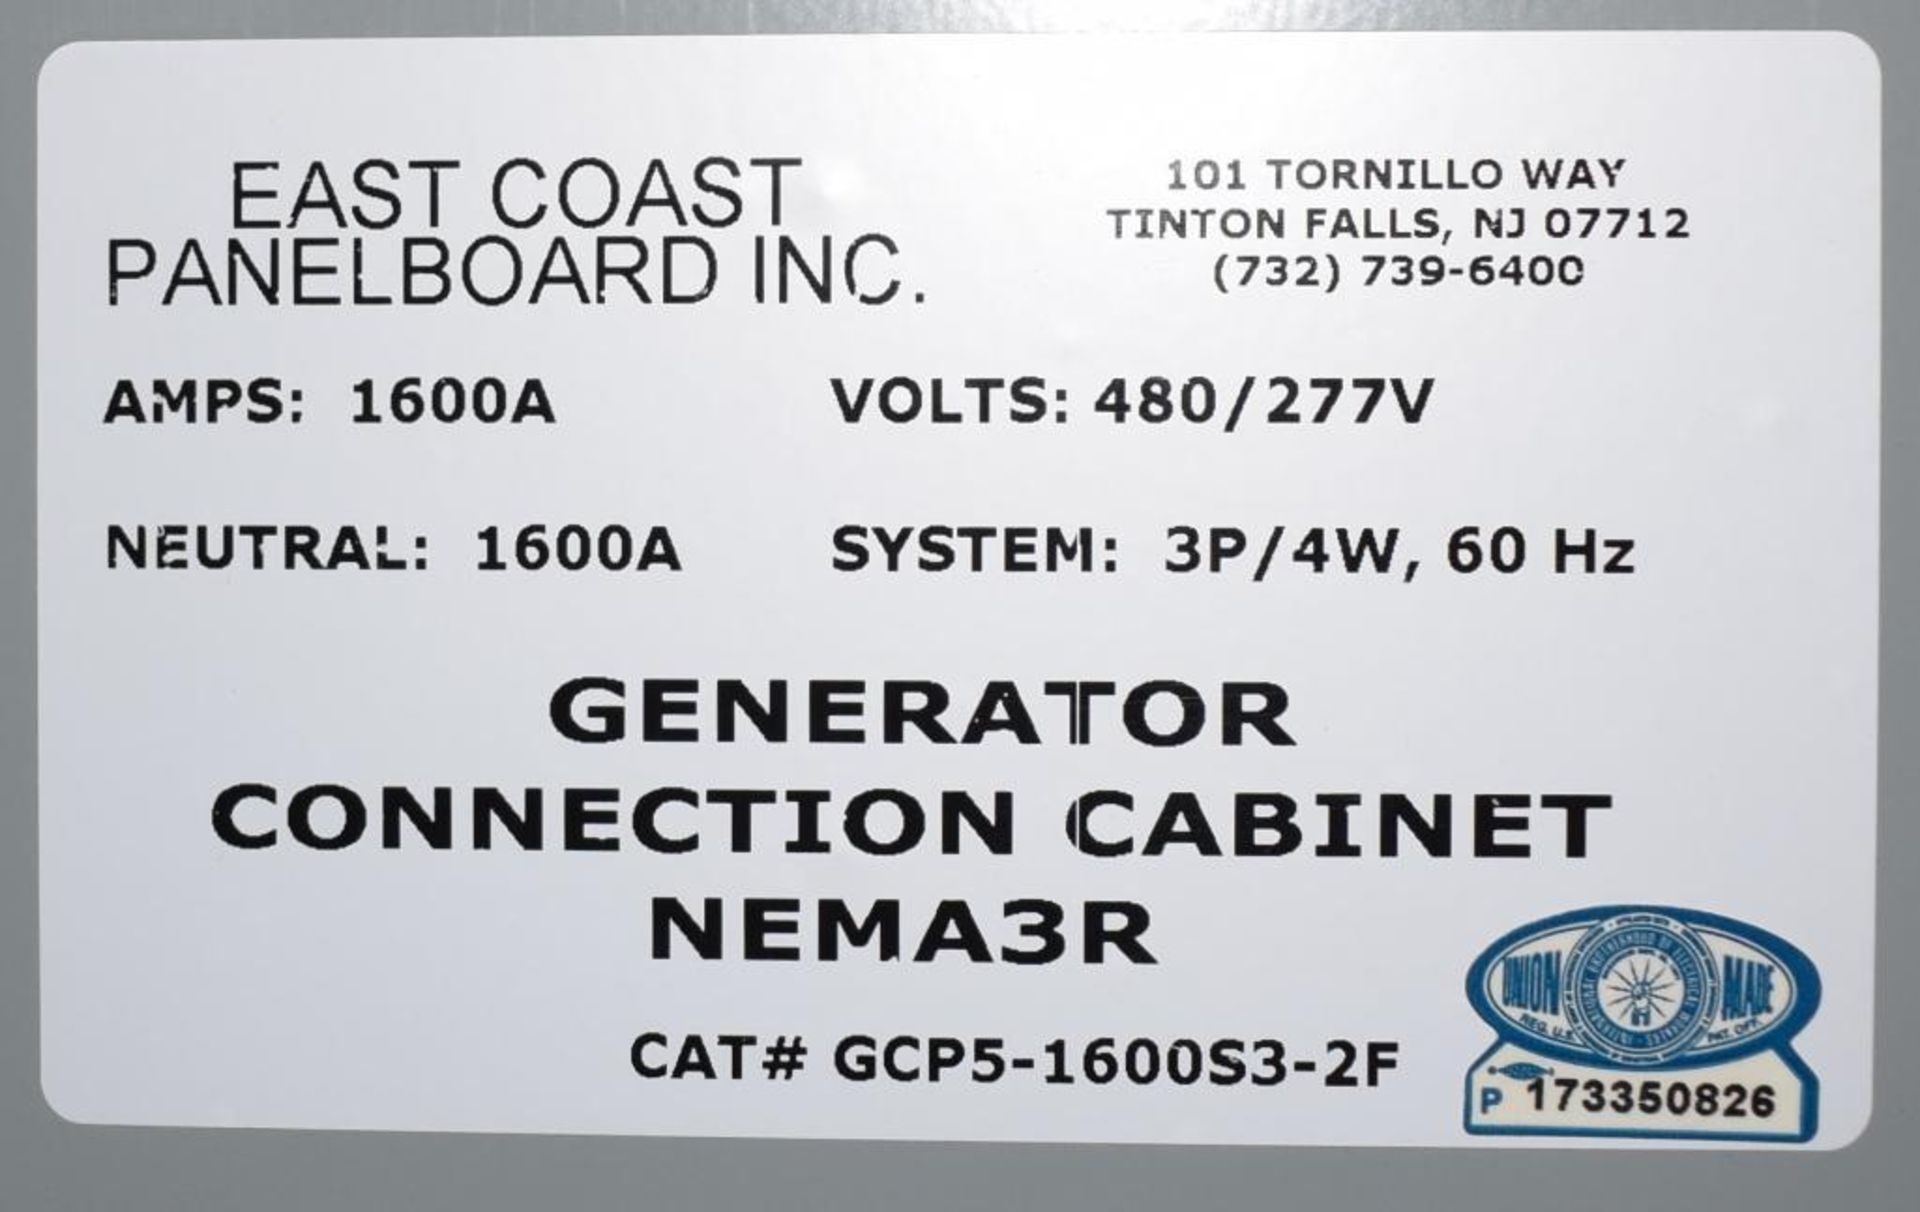 East Coast Panelboard Generator Connection Cabinet, Cat# GCP5-1600S3-2F. Amps 1600A, volts 480/277V, - Image 4 of 6